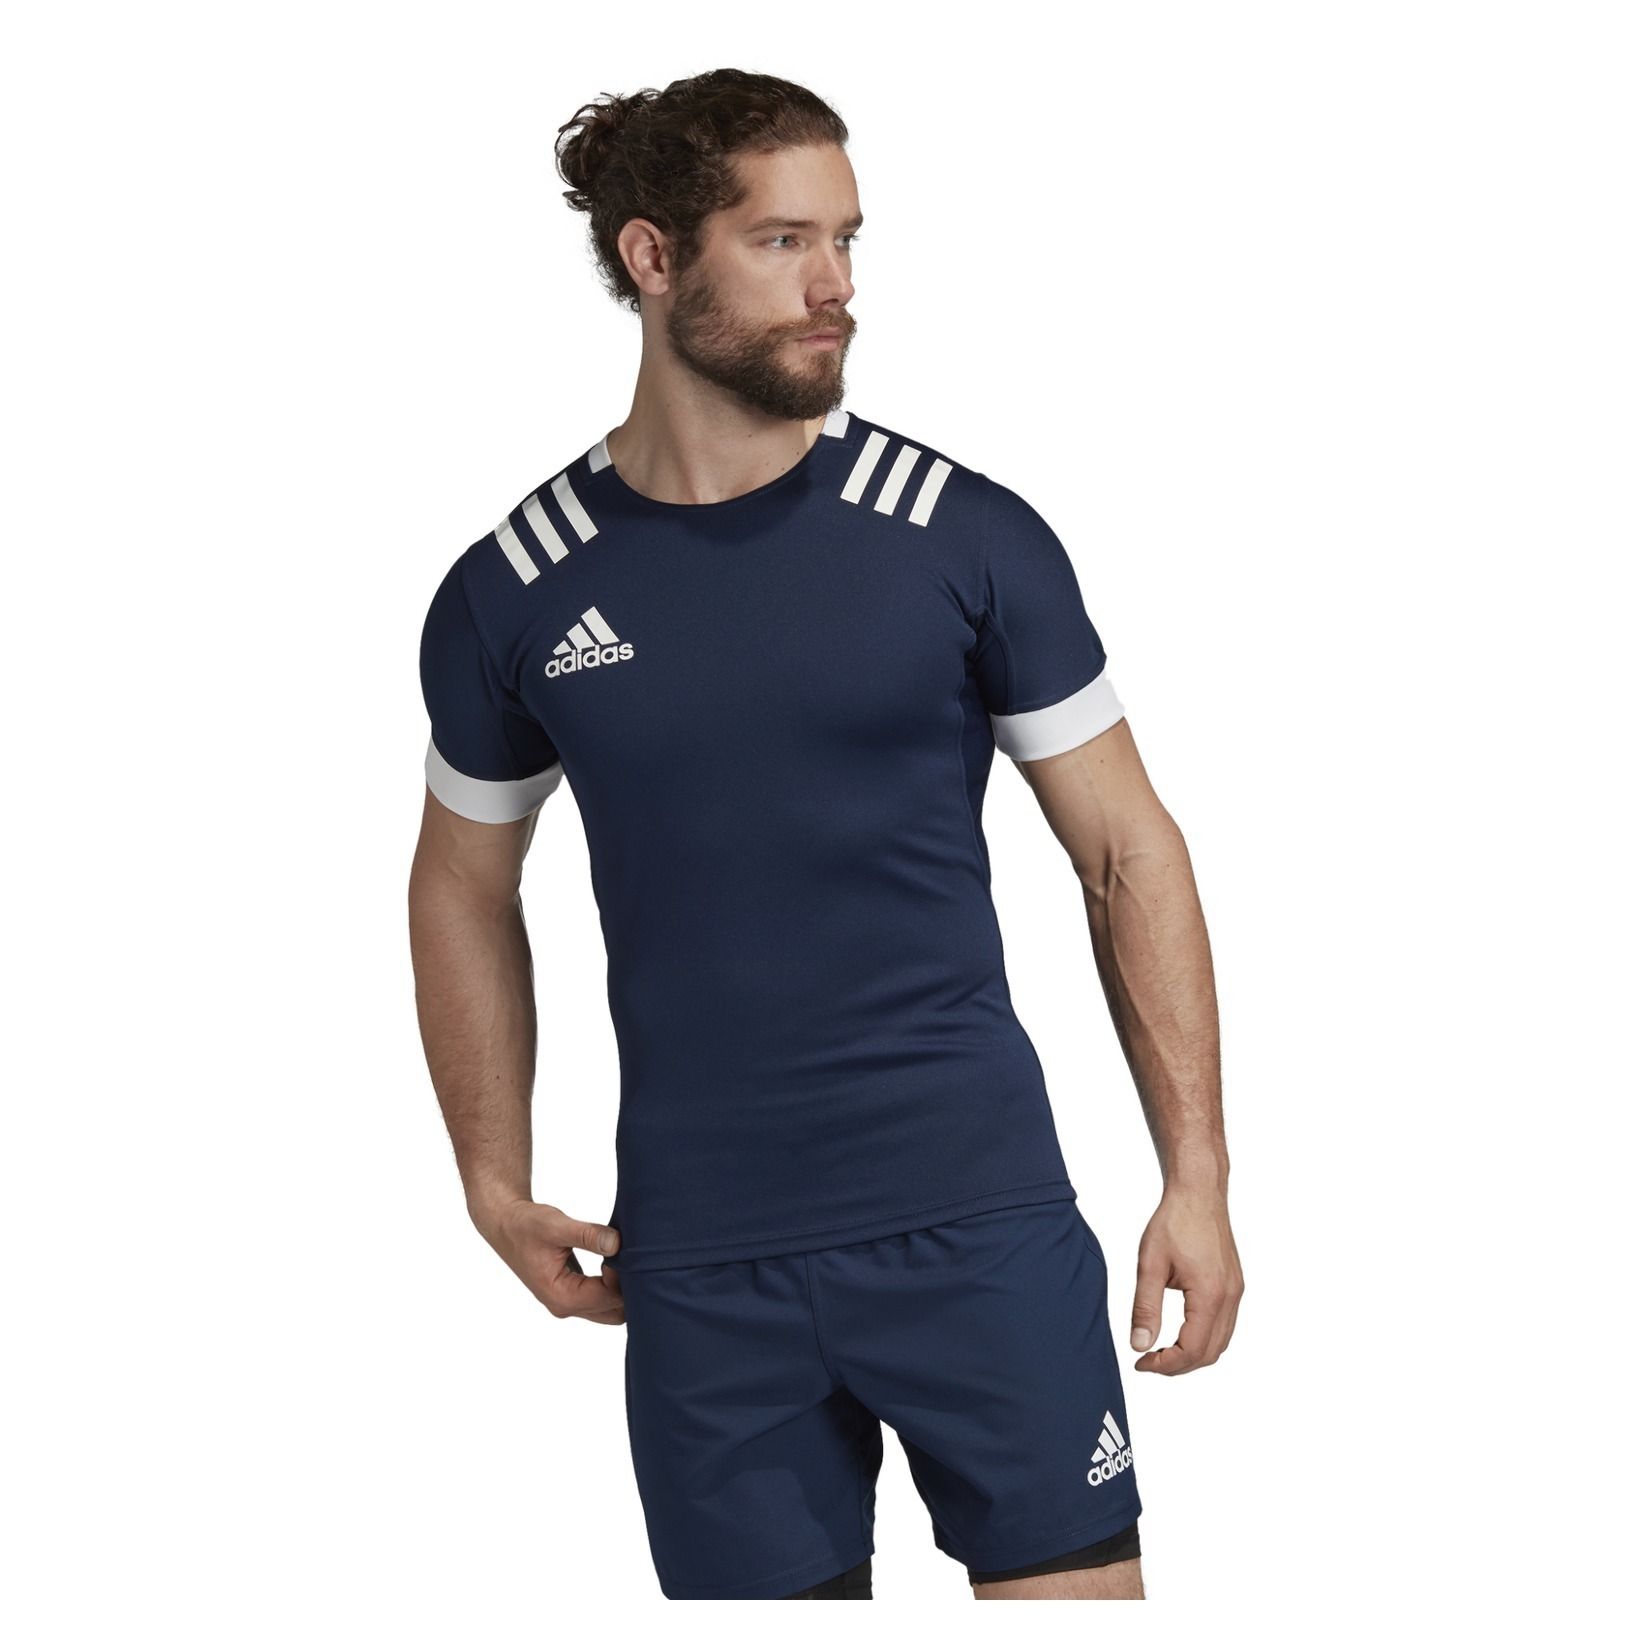 adidas 3 Stripes Fitted Rugby Jersey